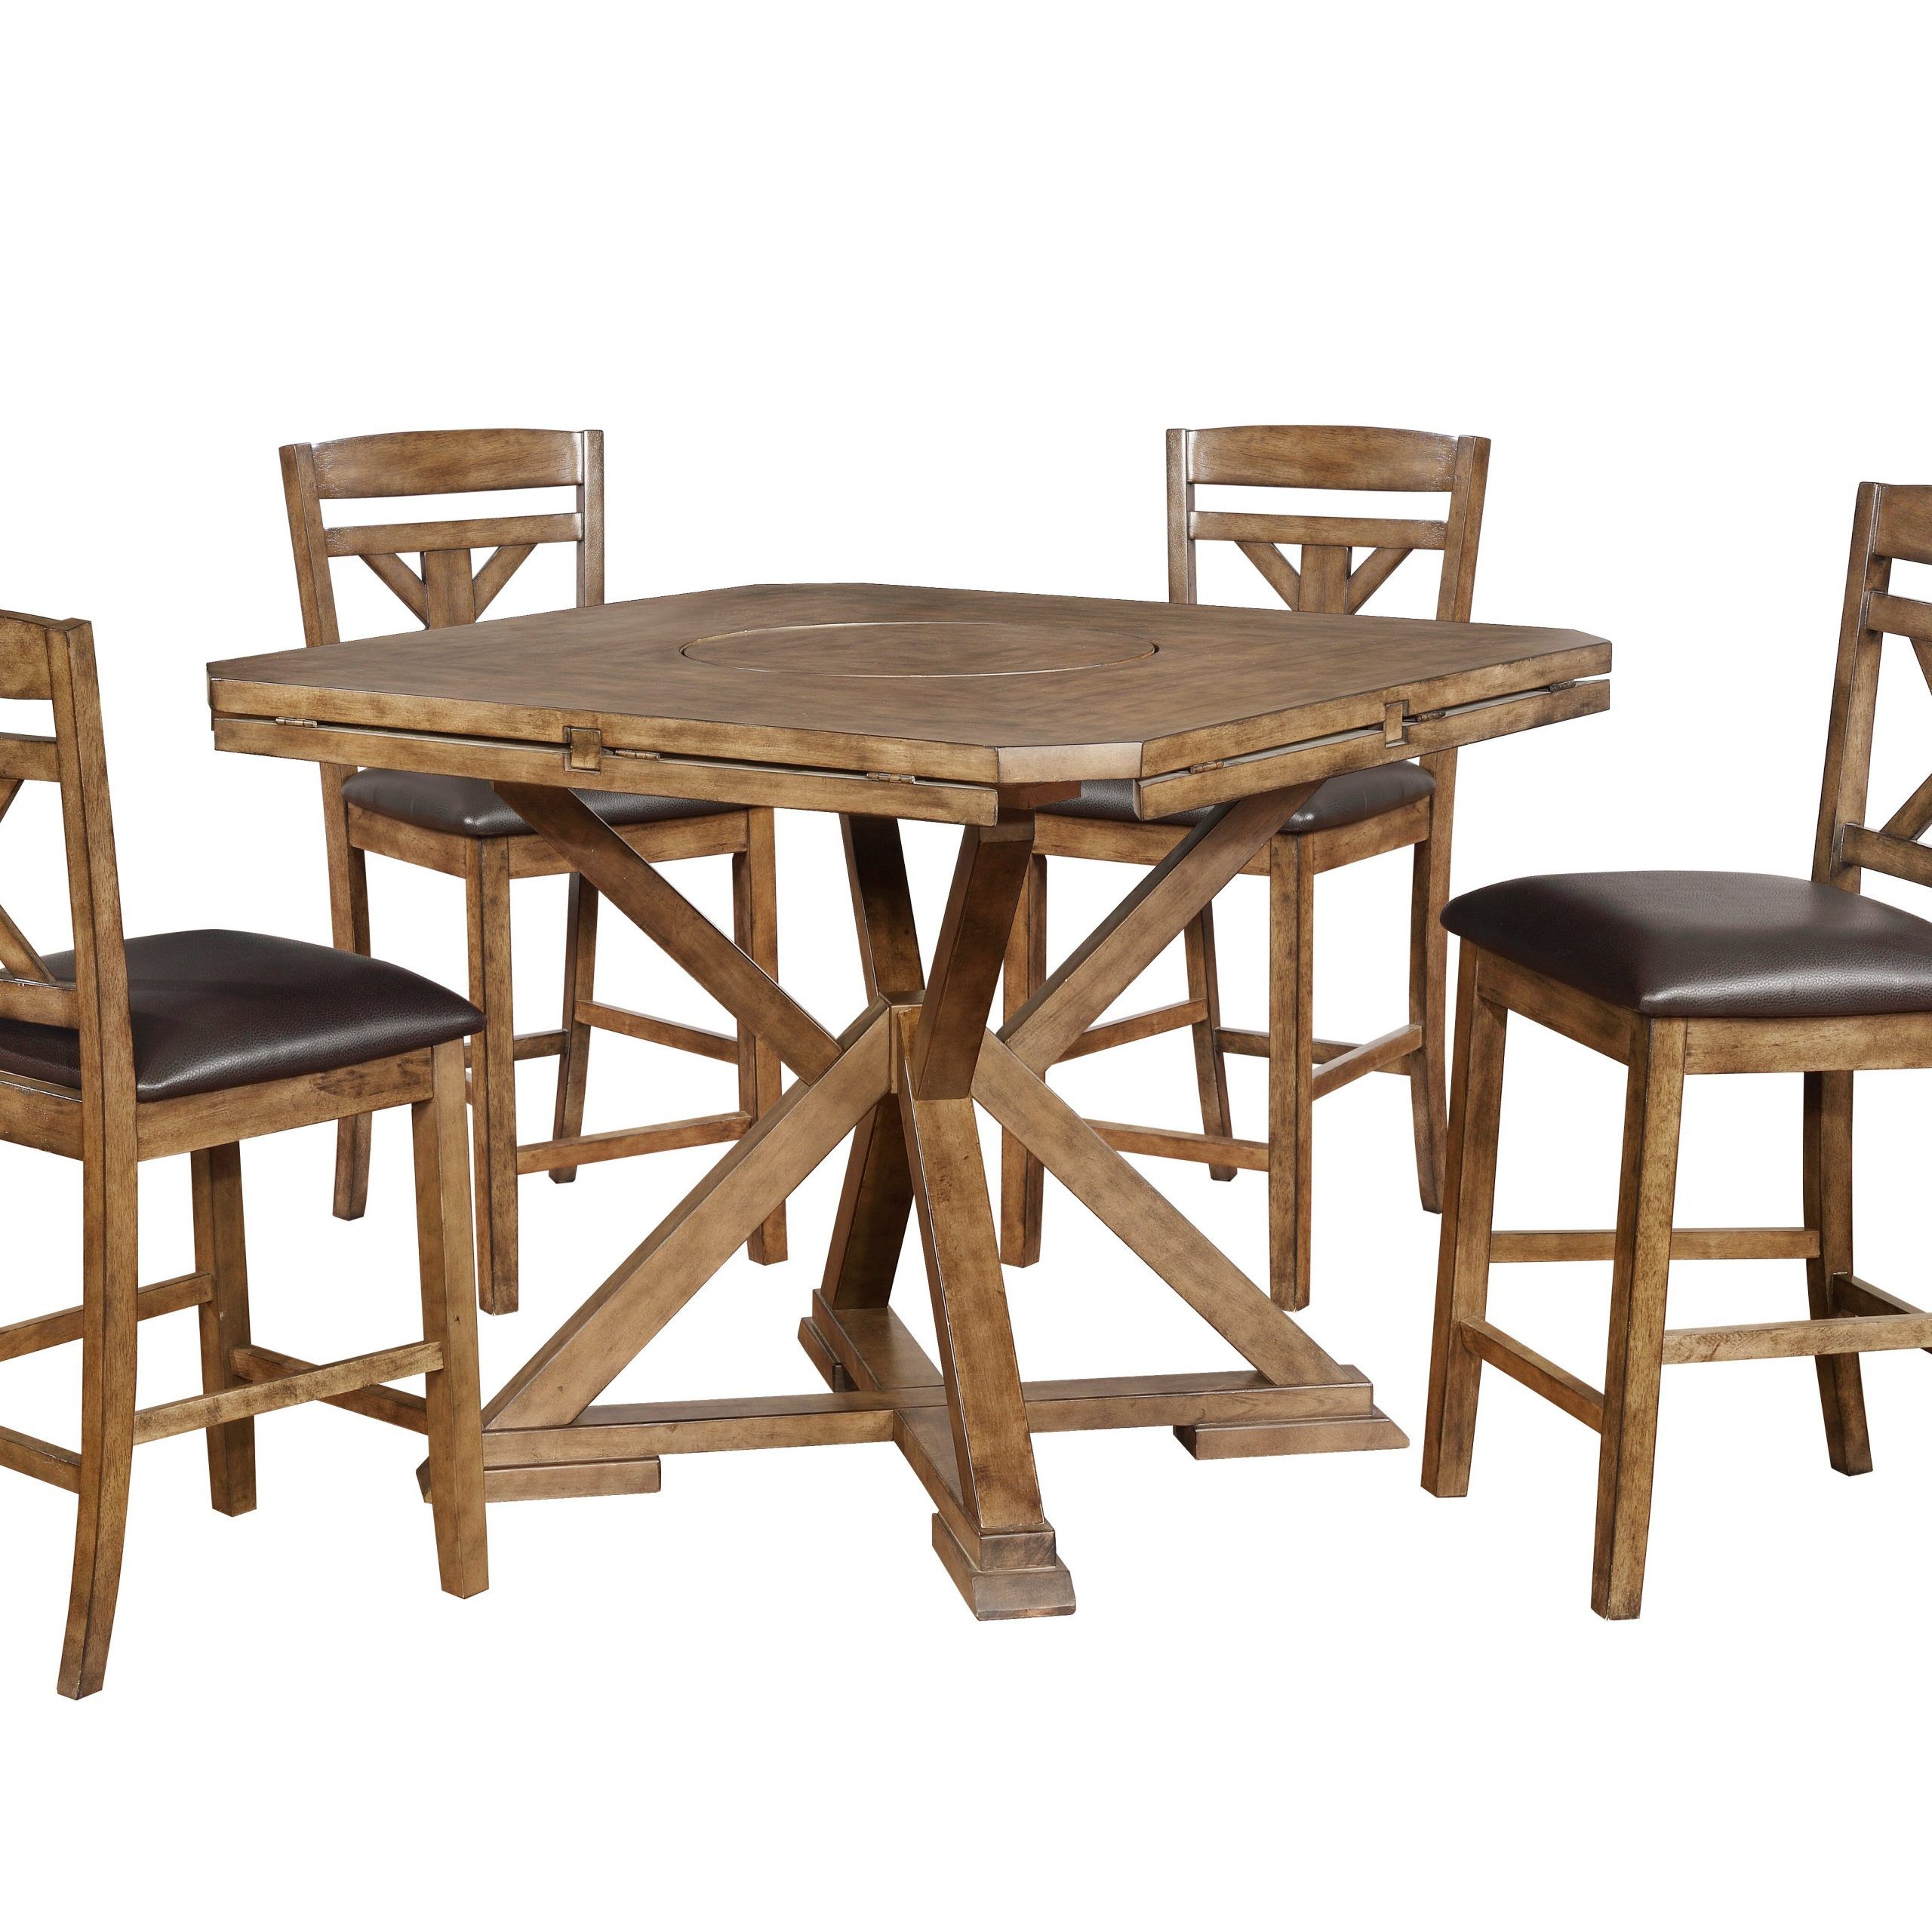 Millwood Pines Chapman 5 Piece Drop Leaf Dining Set (View 14 of 25)